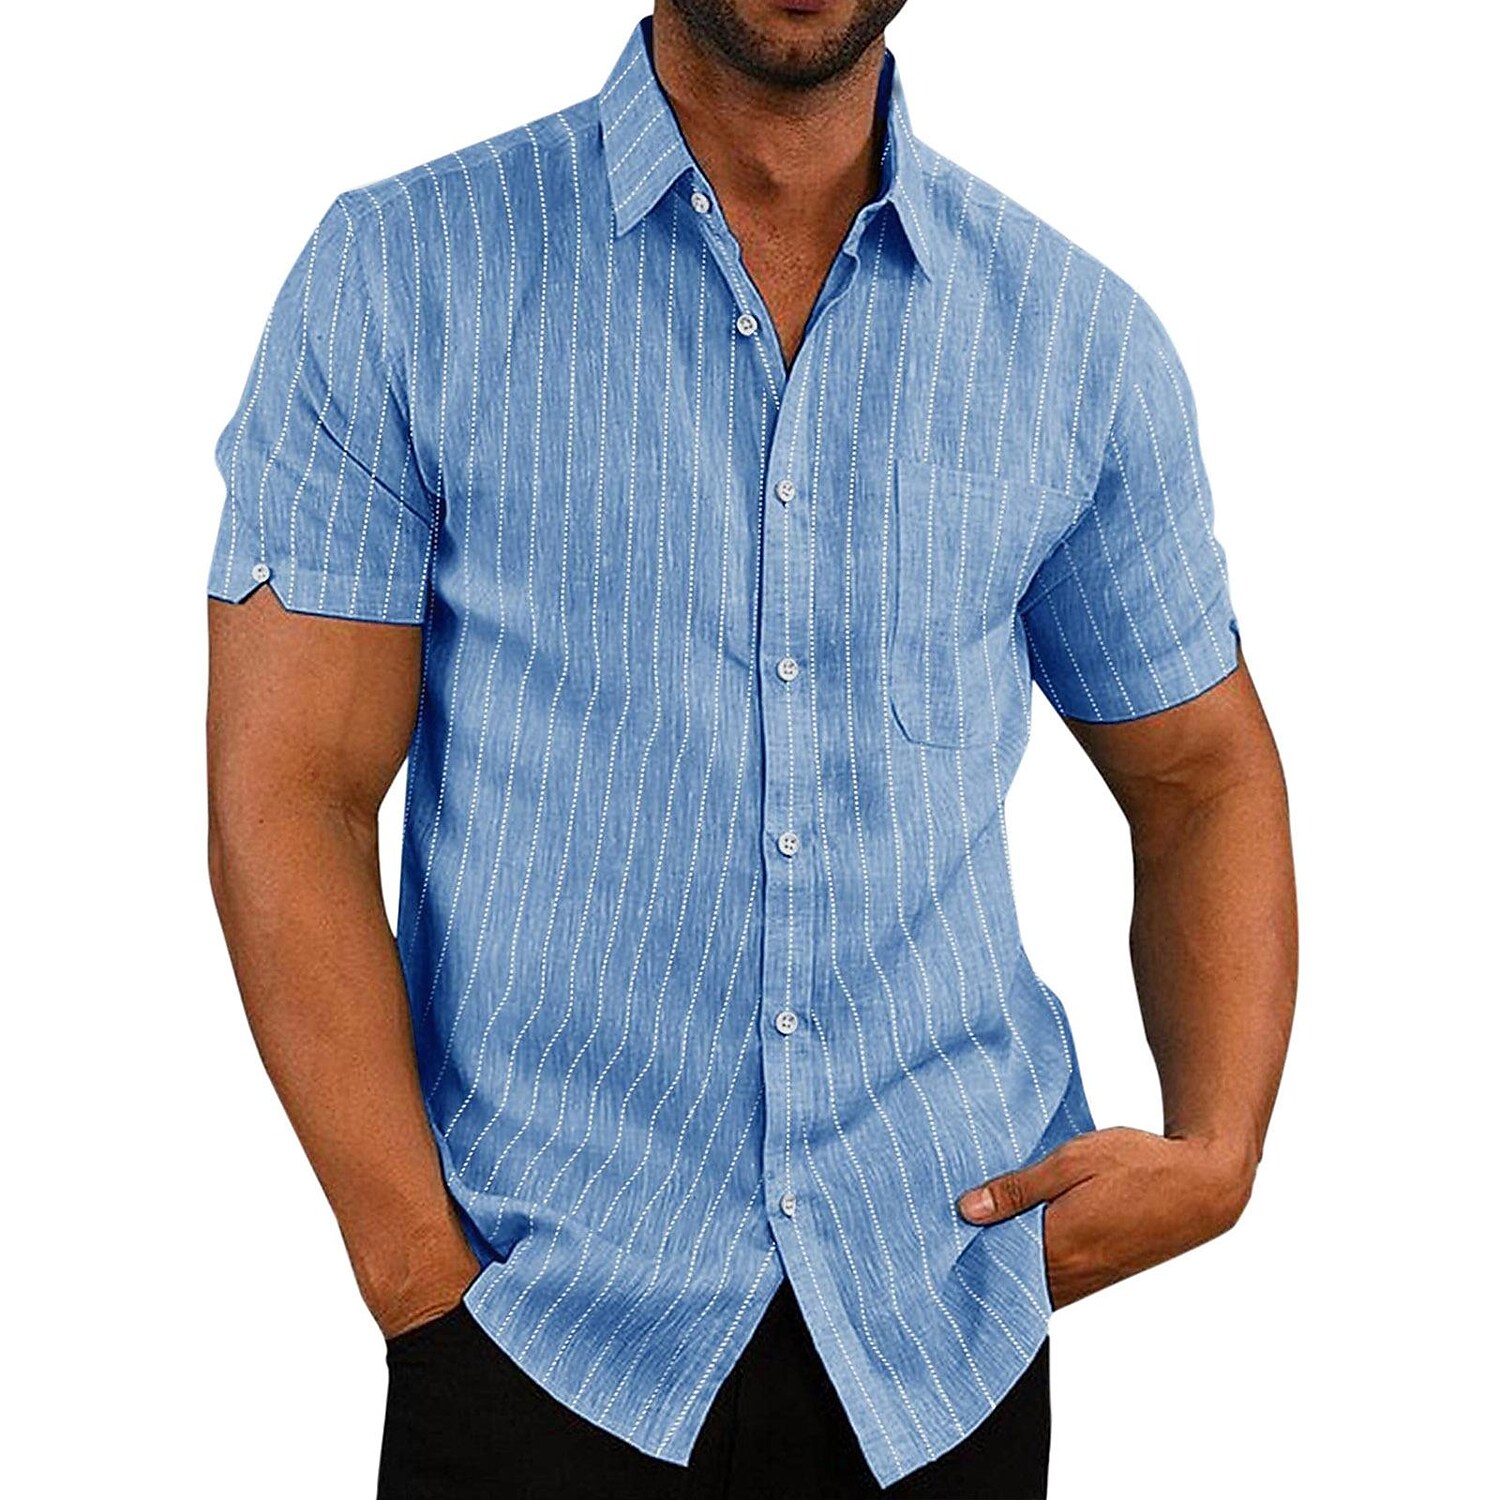 Men's Striped Short-sleeved Casual Shirts